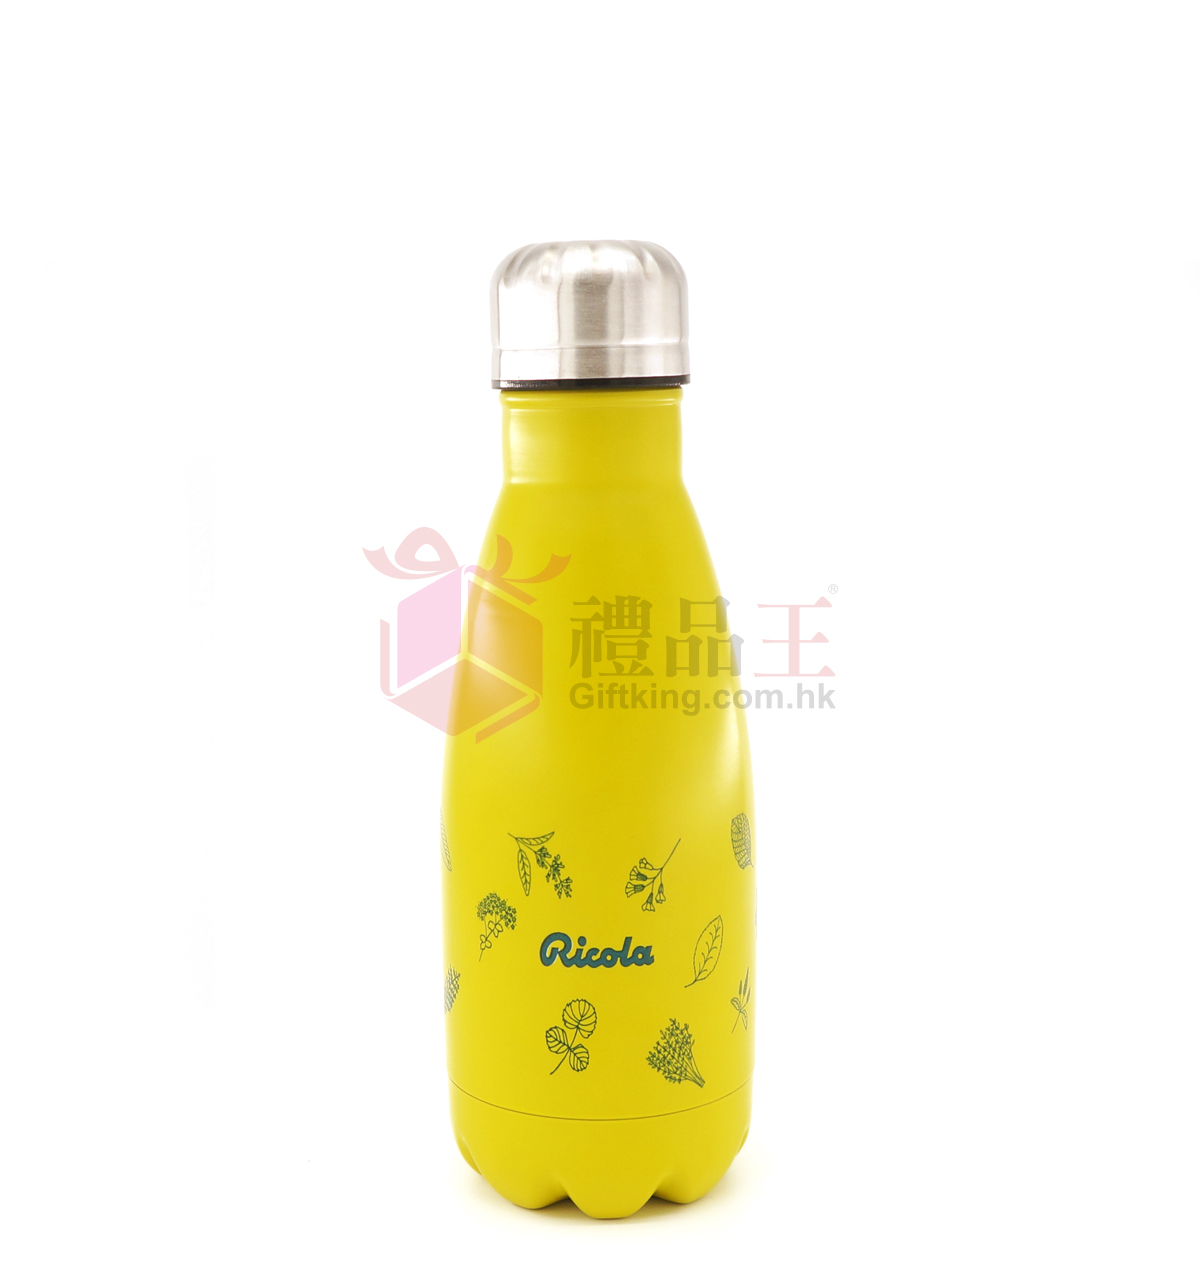 Ricola stainless steel insulated water bottle (sports gift)